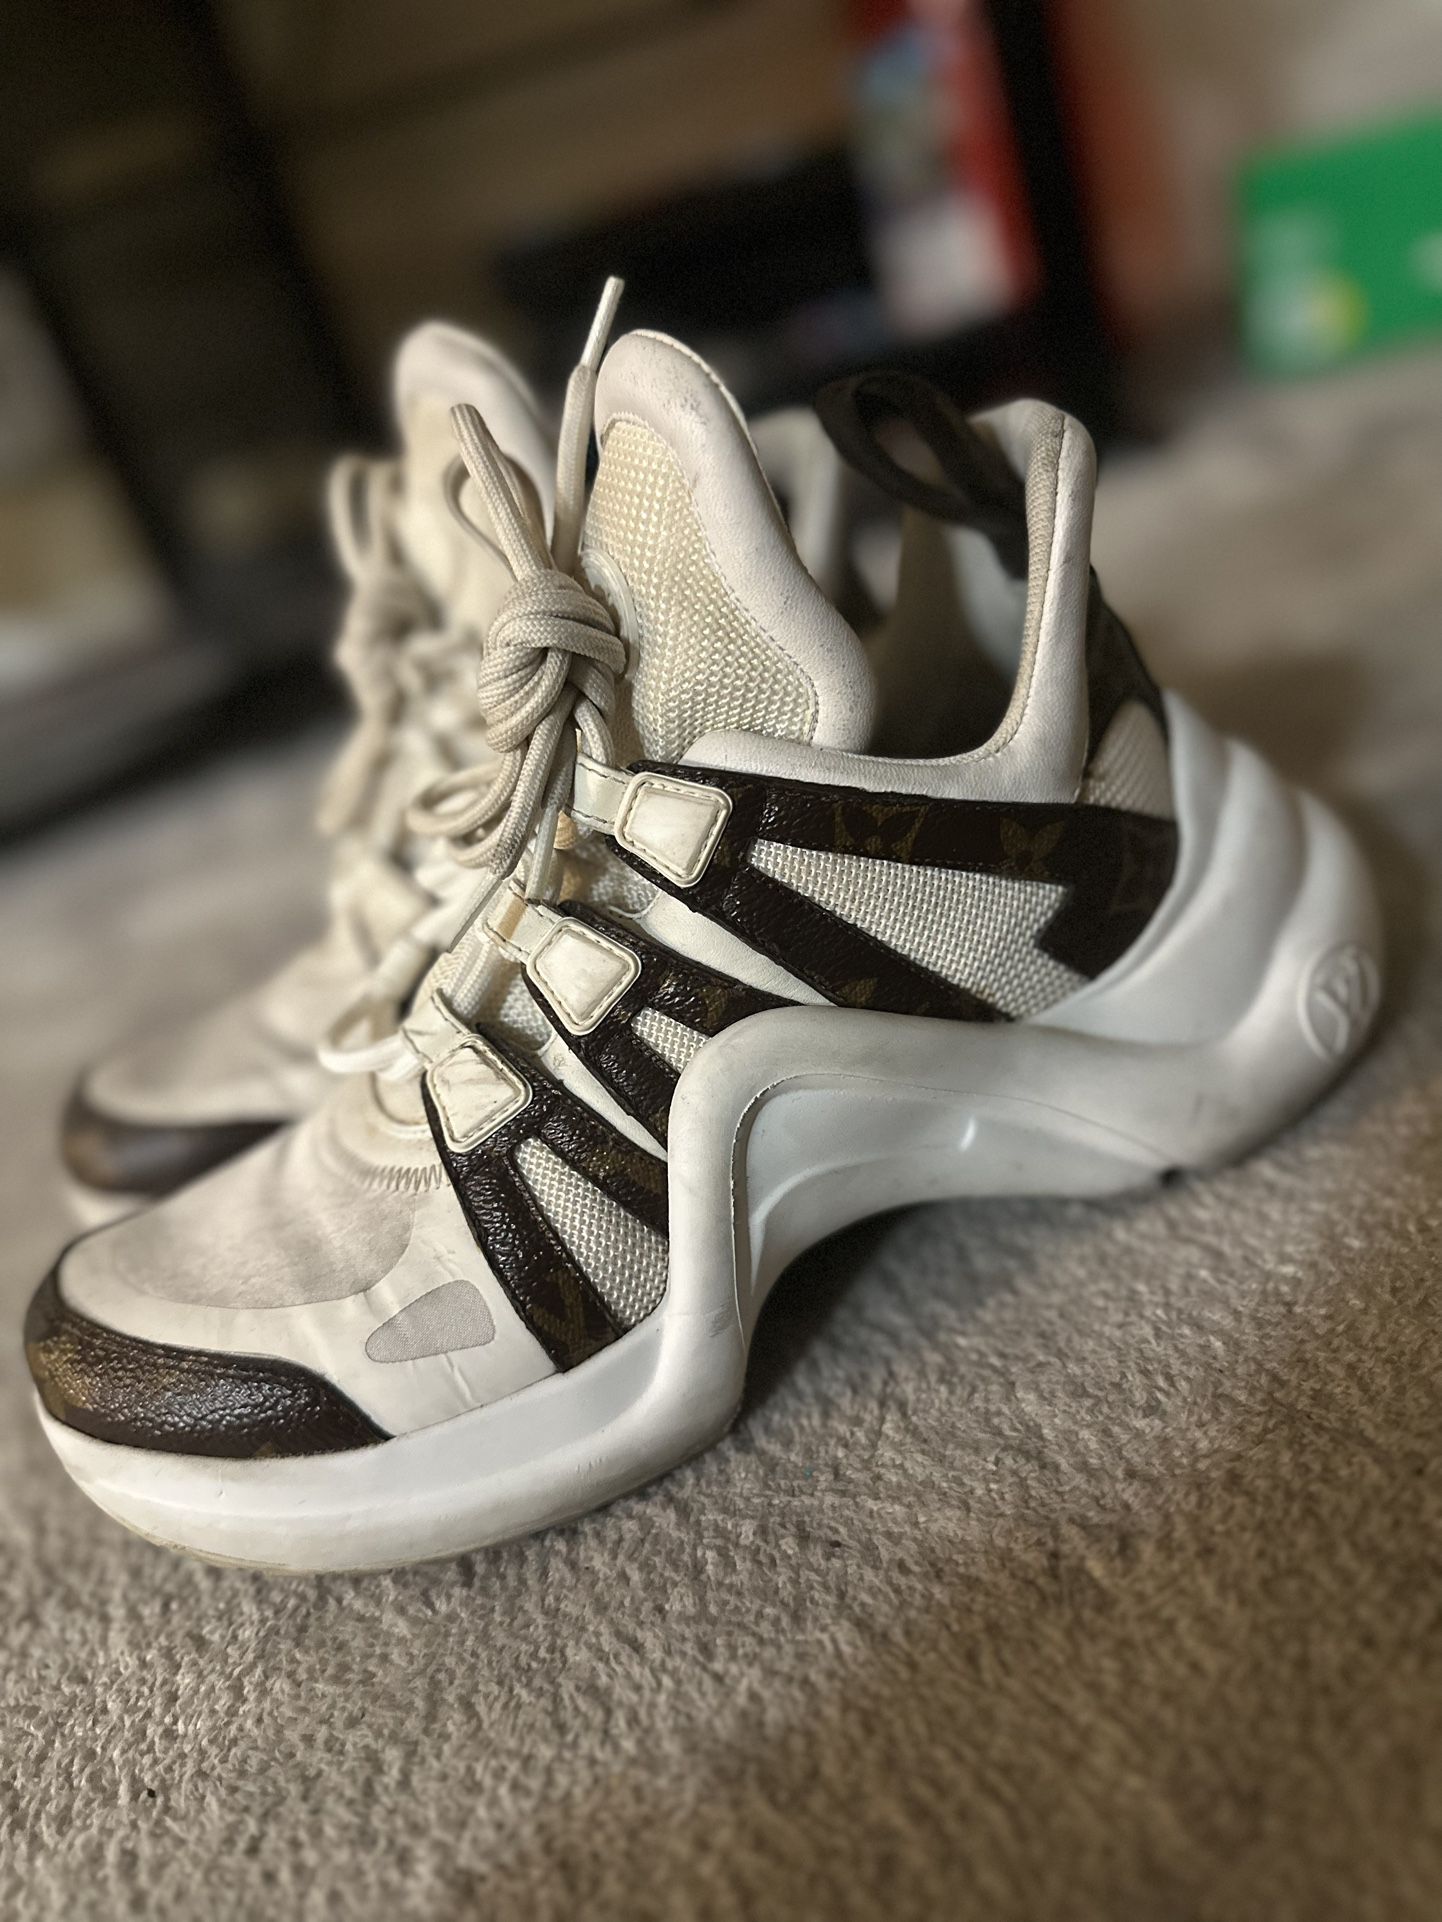 LOUIS VUITTON ARCHLIGHT SNEAKER REVIEW & HOW TO STYLE 